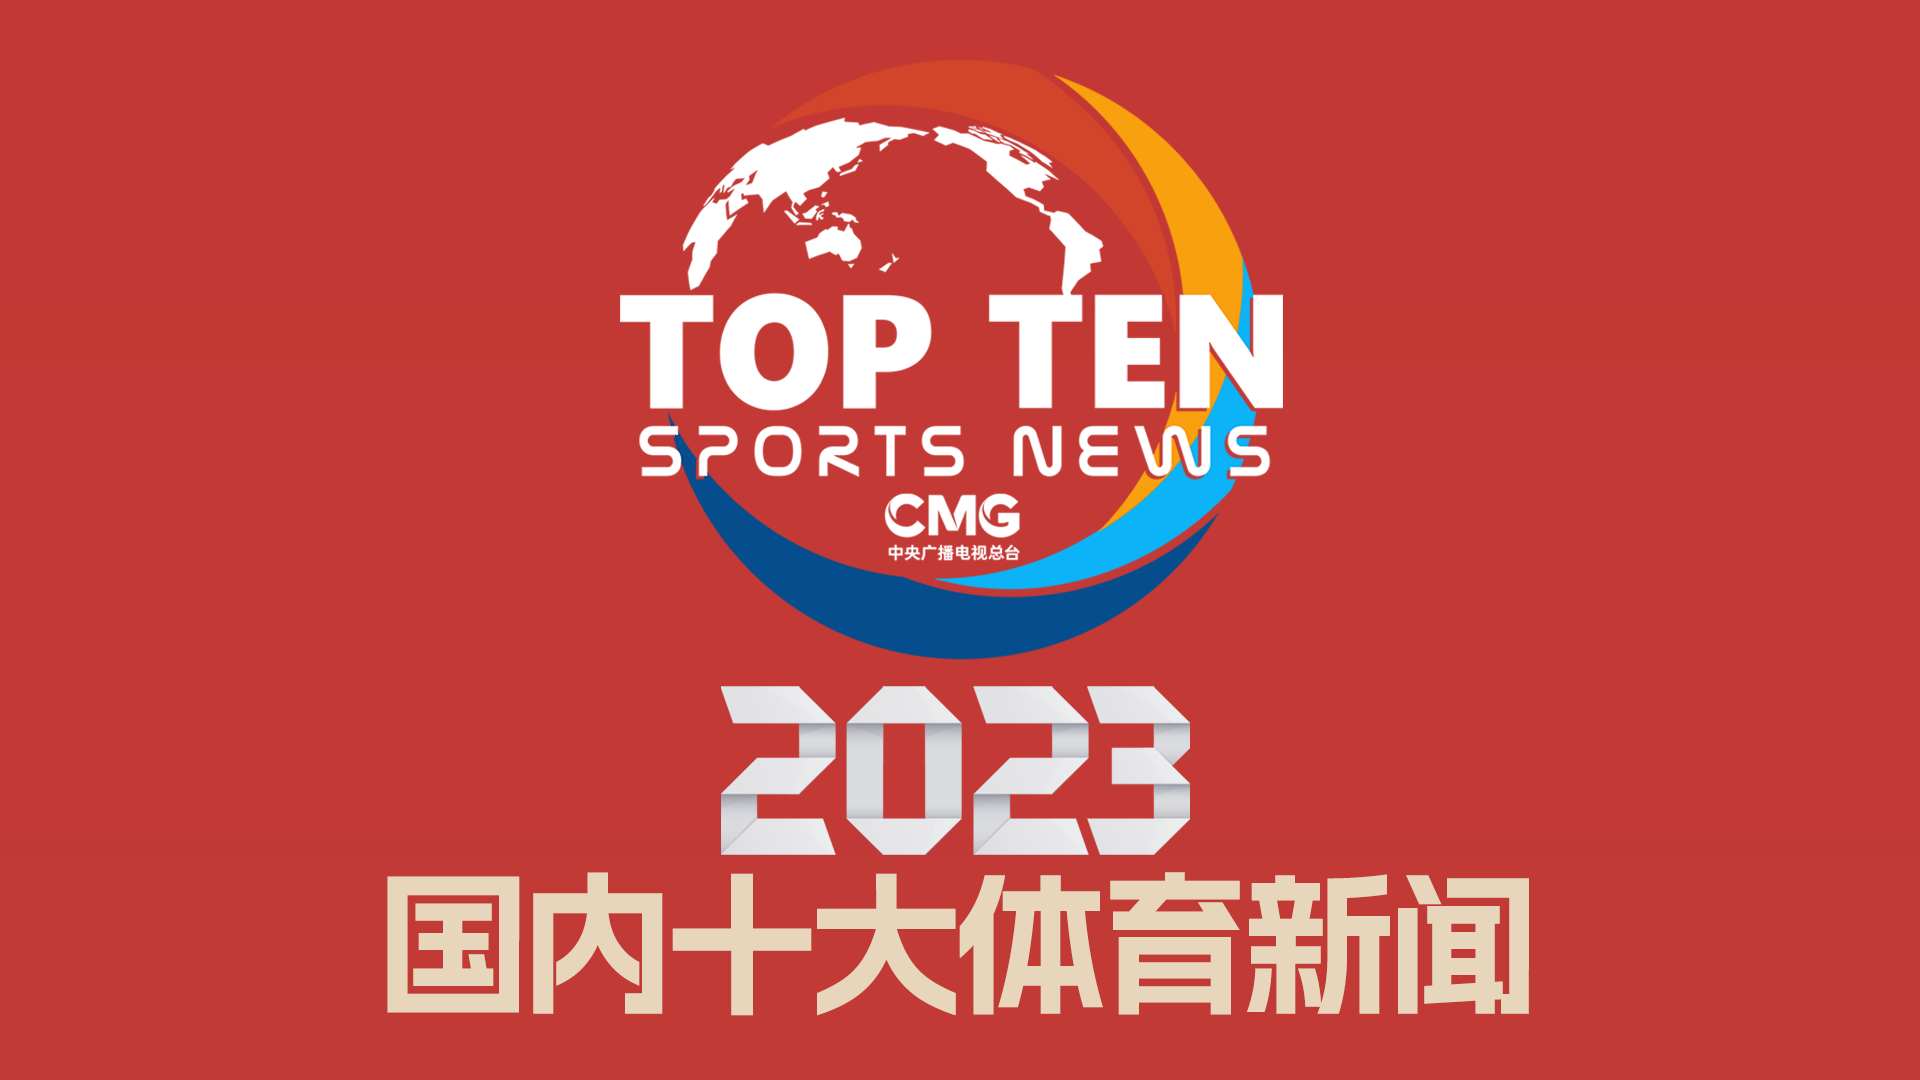 CMG's top 10 Chinese sports news stories of the year that made the country proud